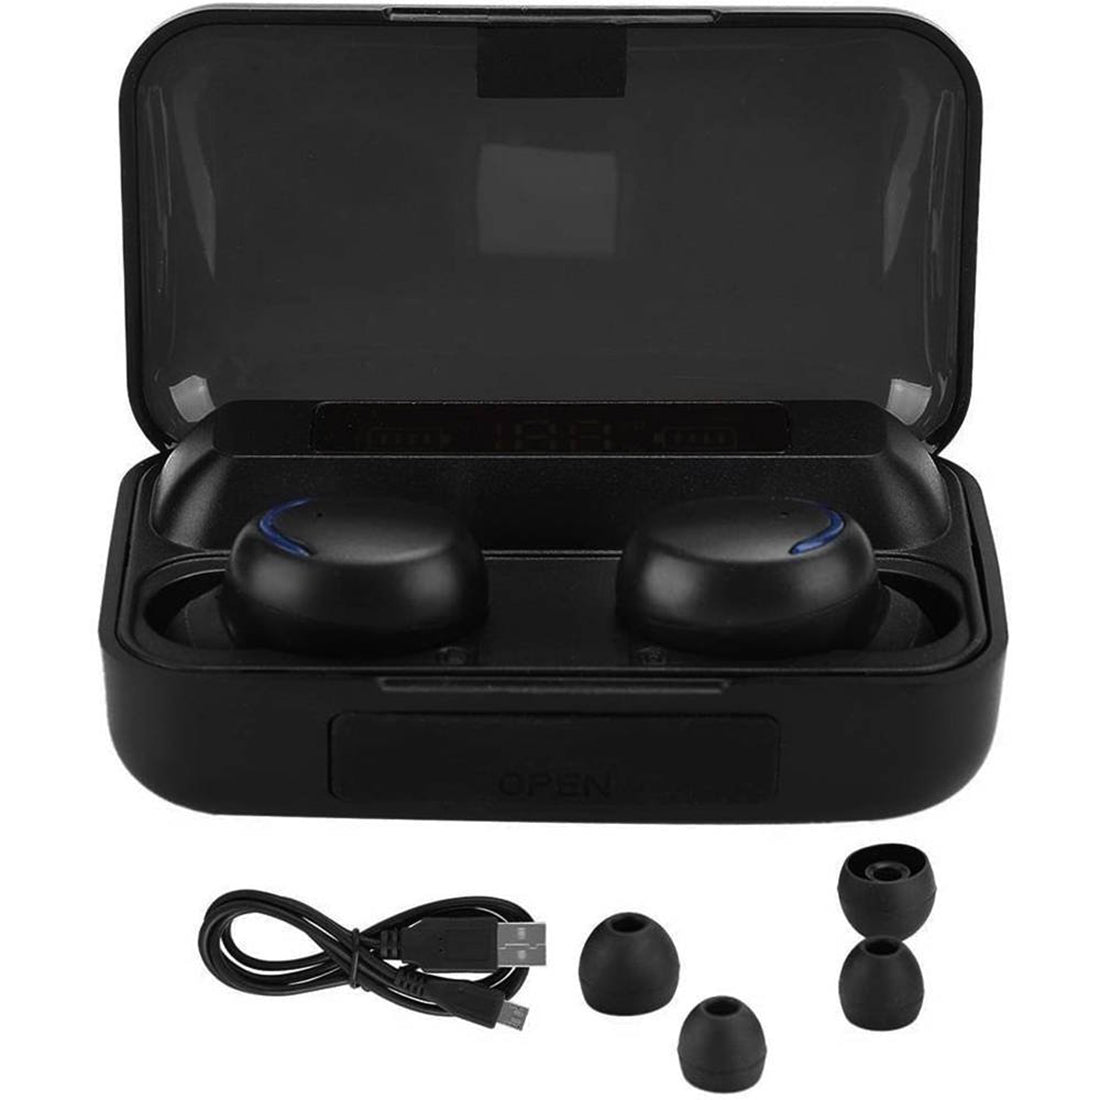 True Wireless Stereo Earbuds With Power Bank